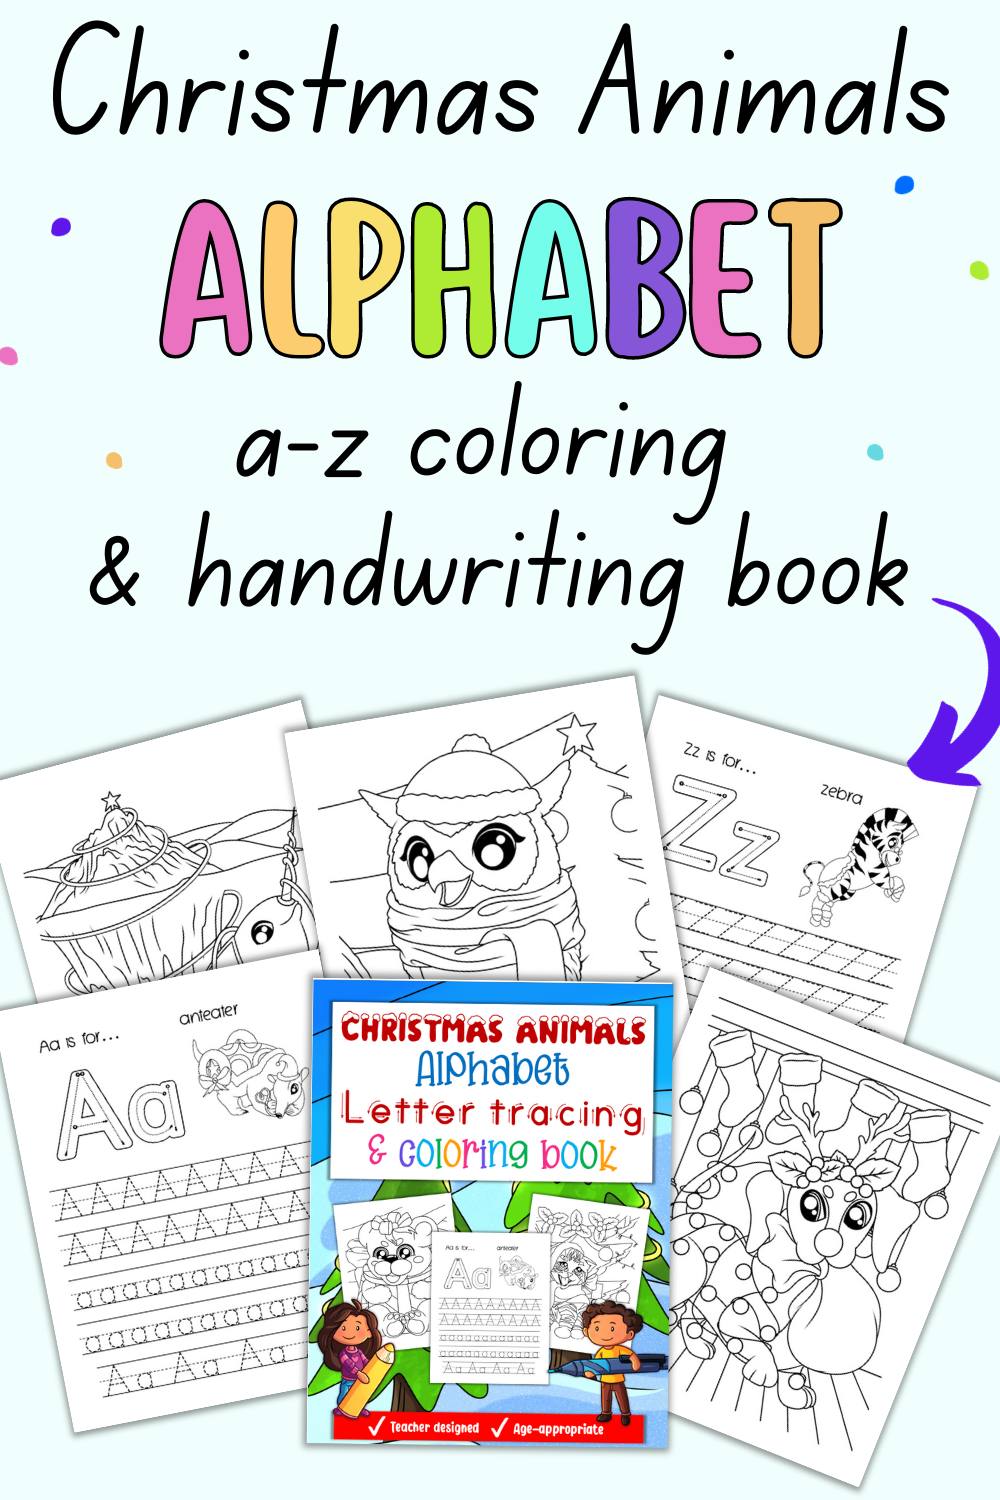 Text "Christmas animals a-z coloring and handwriting book" with a preview of the front cover and five interior pages